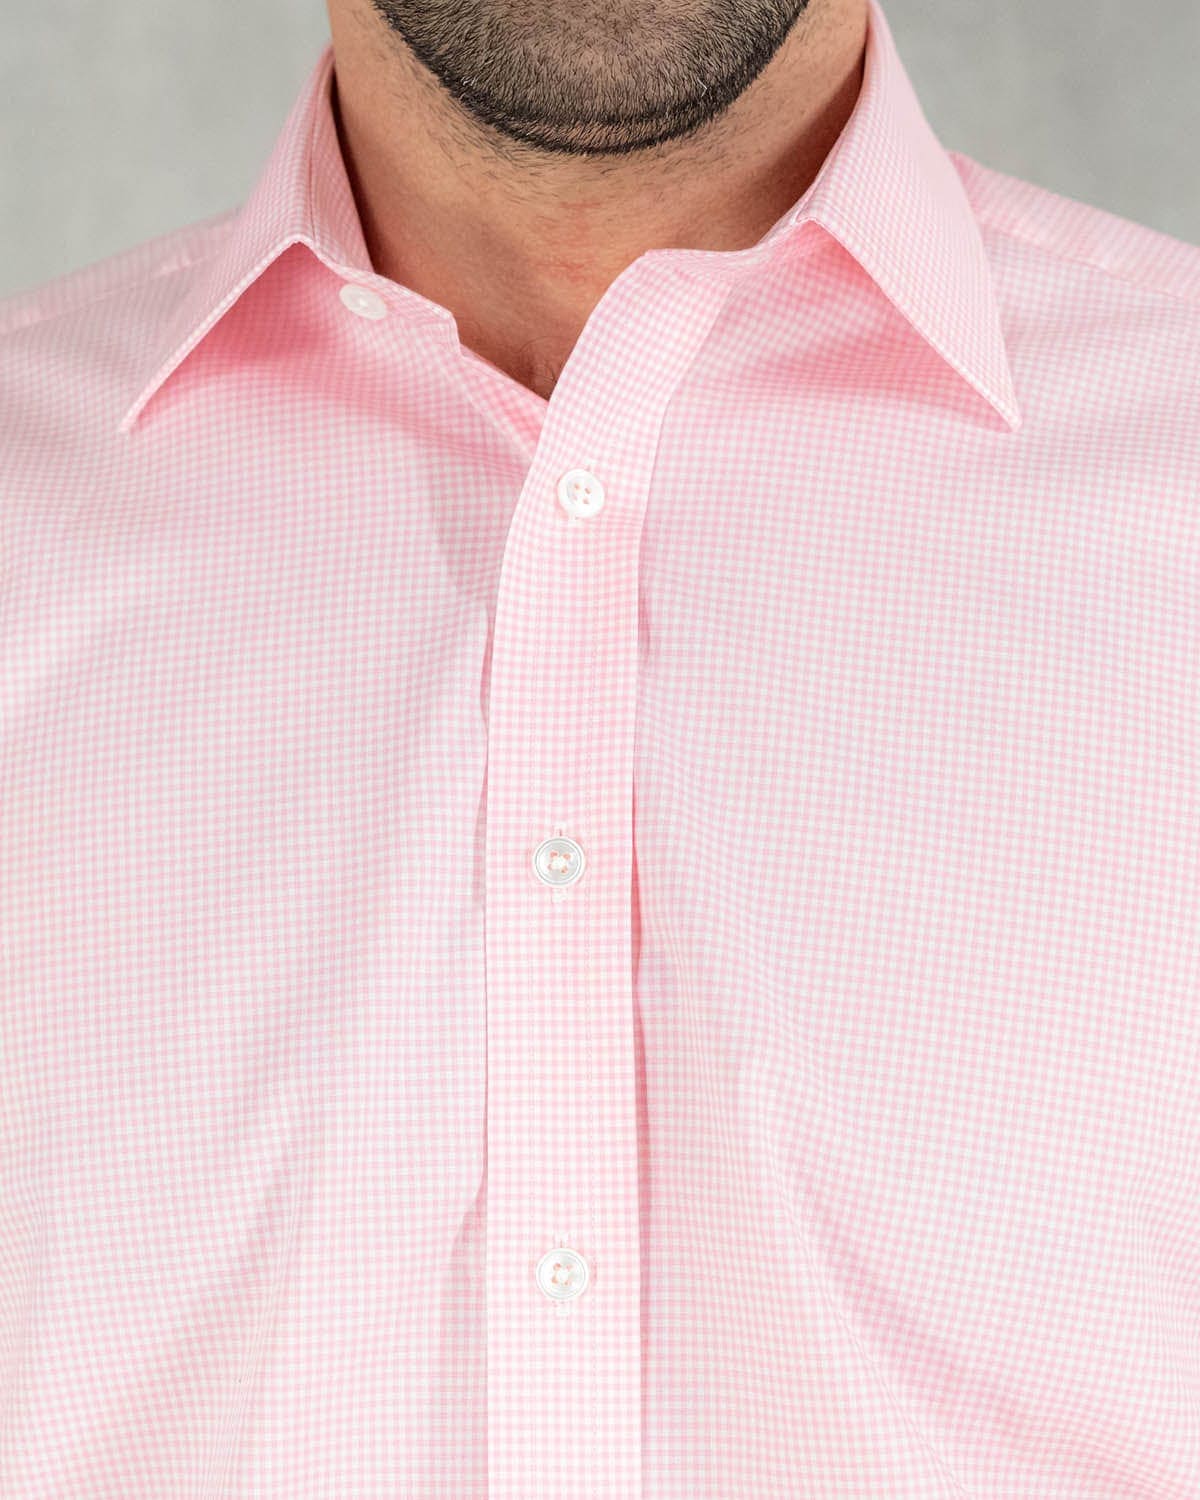 Classic Fit, Classic Collar, Two Button Cuff Shirt In Pink Gingham Check